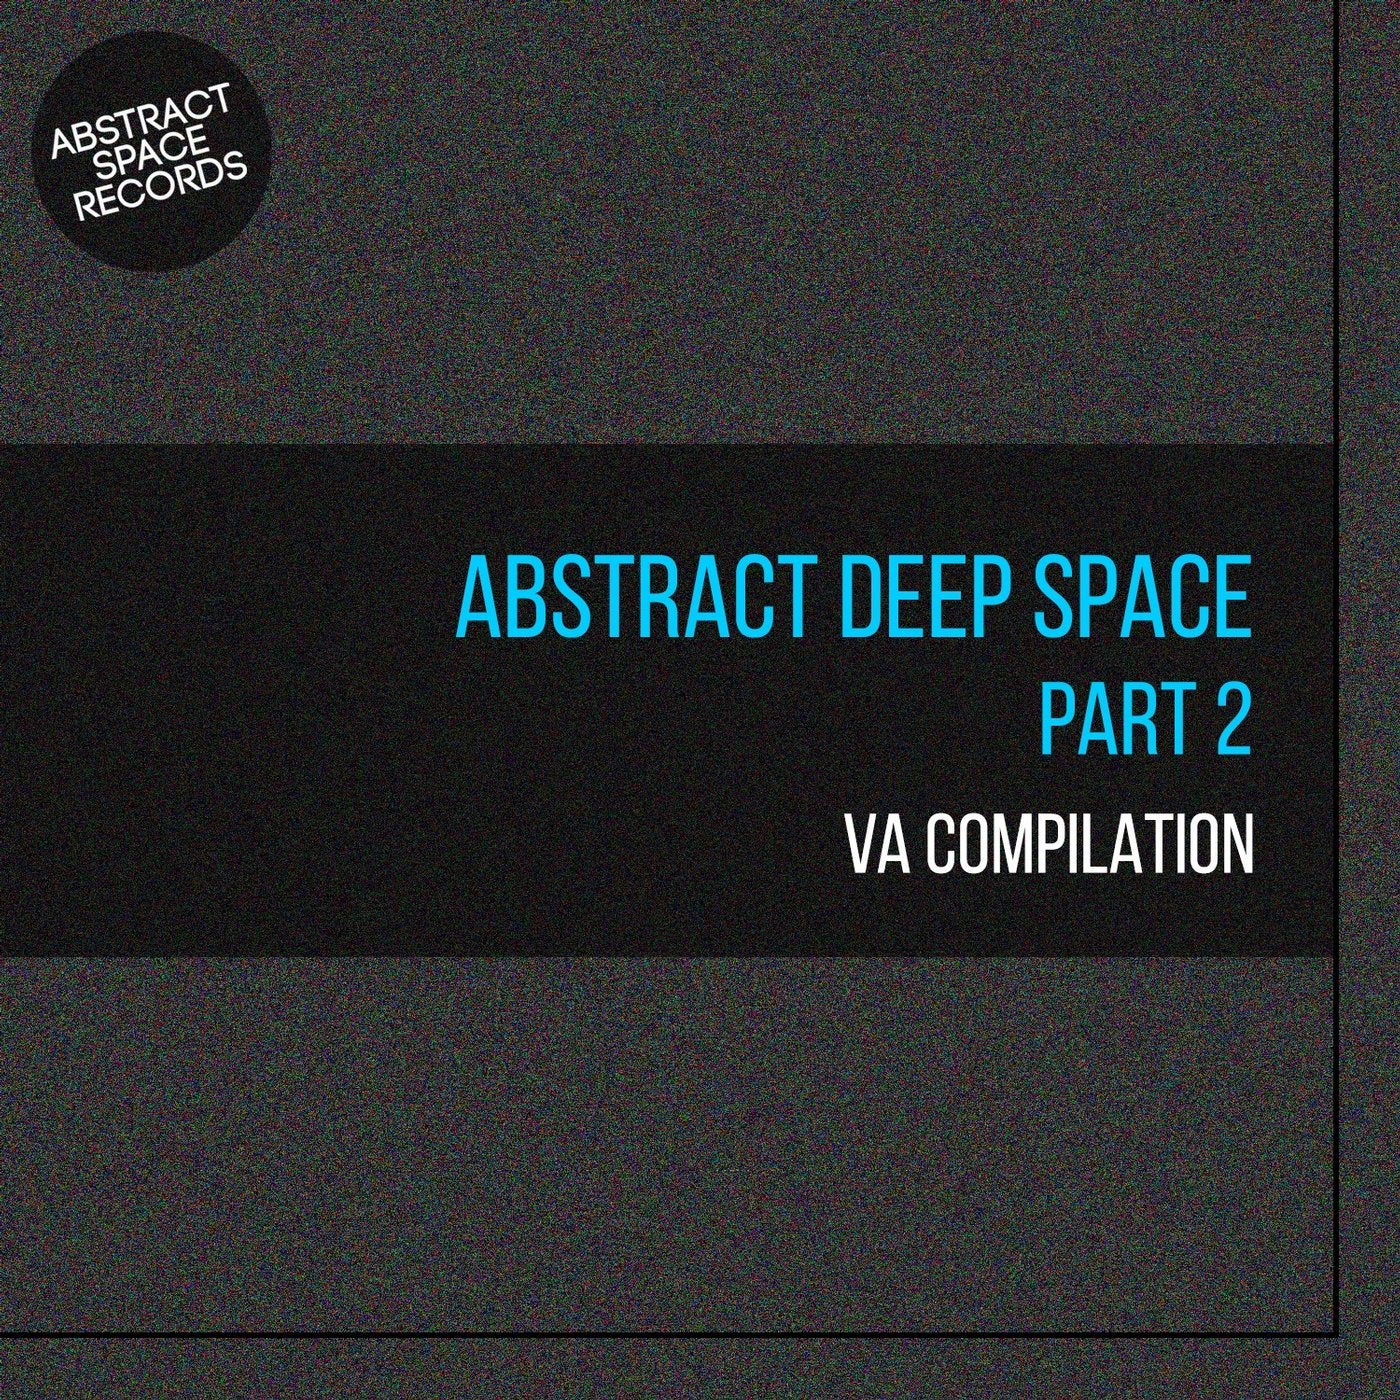 Abstract Deep Space Part 2